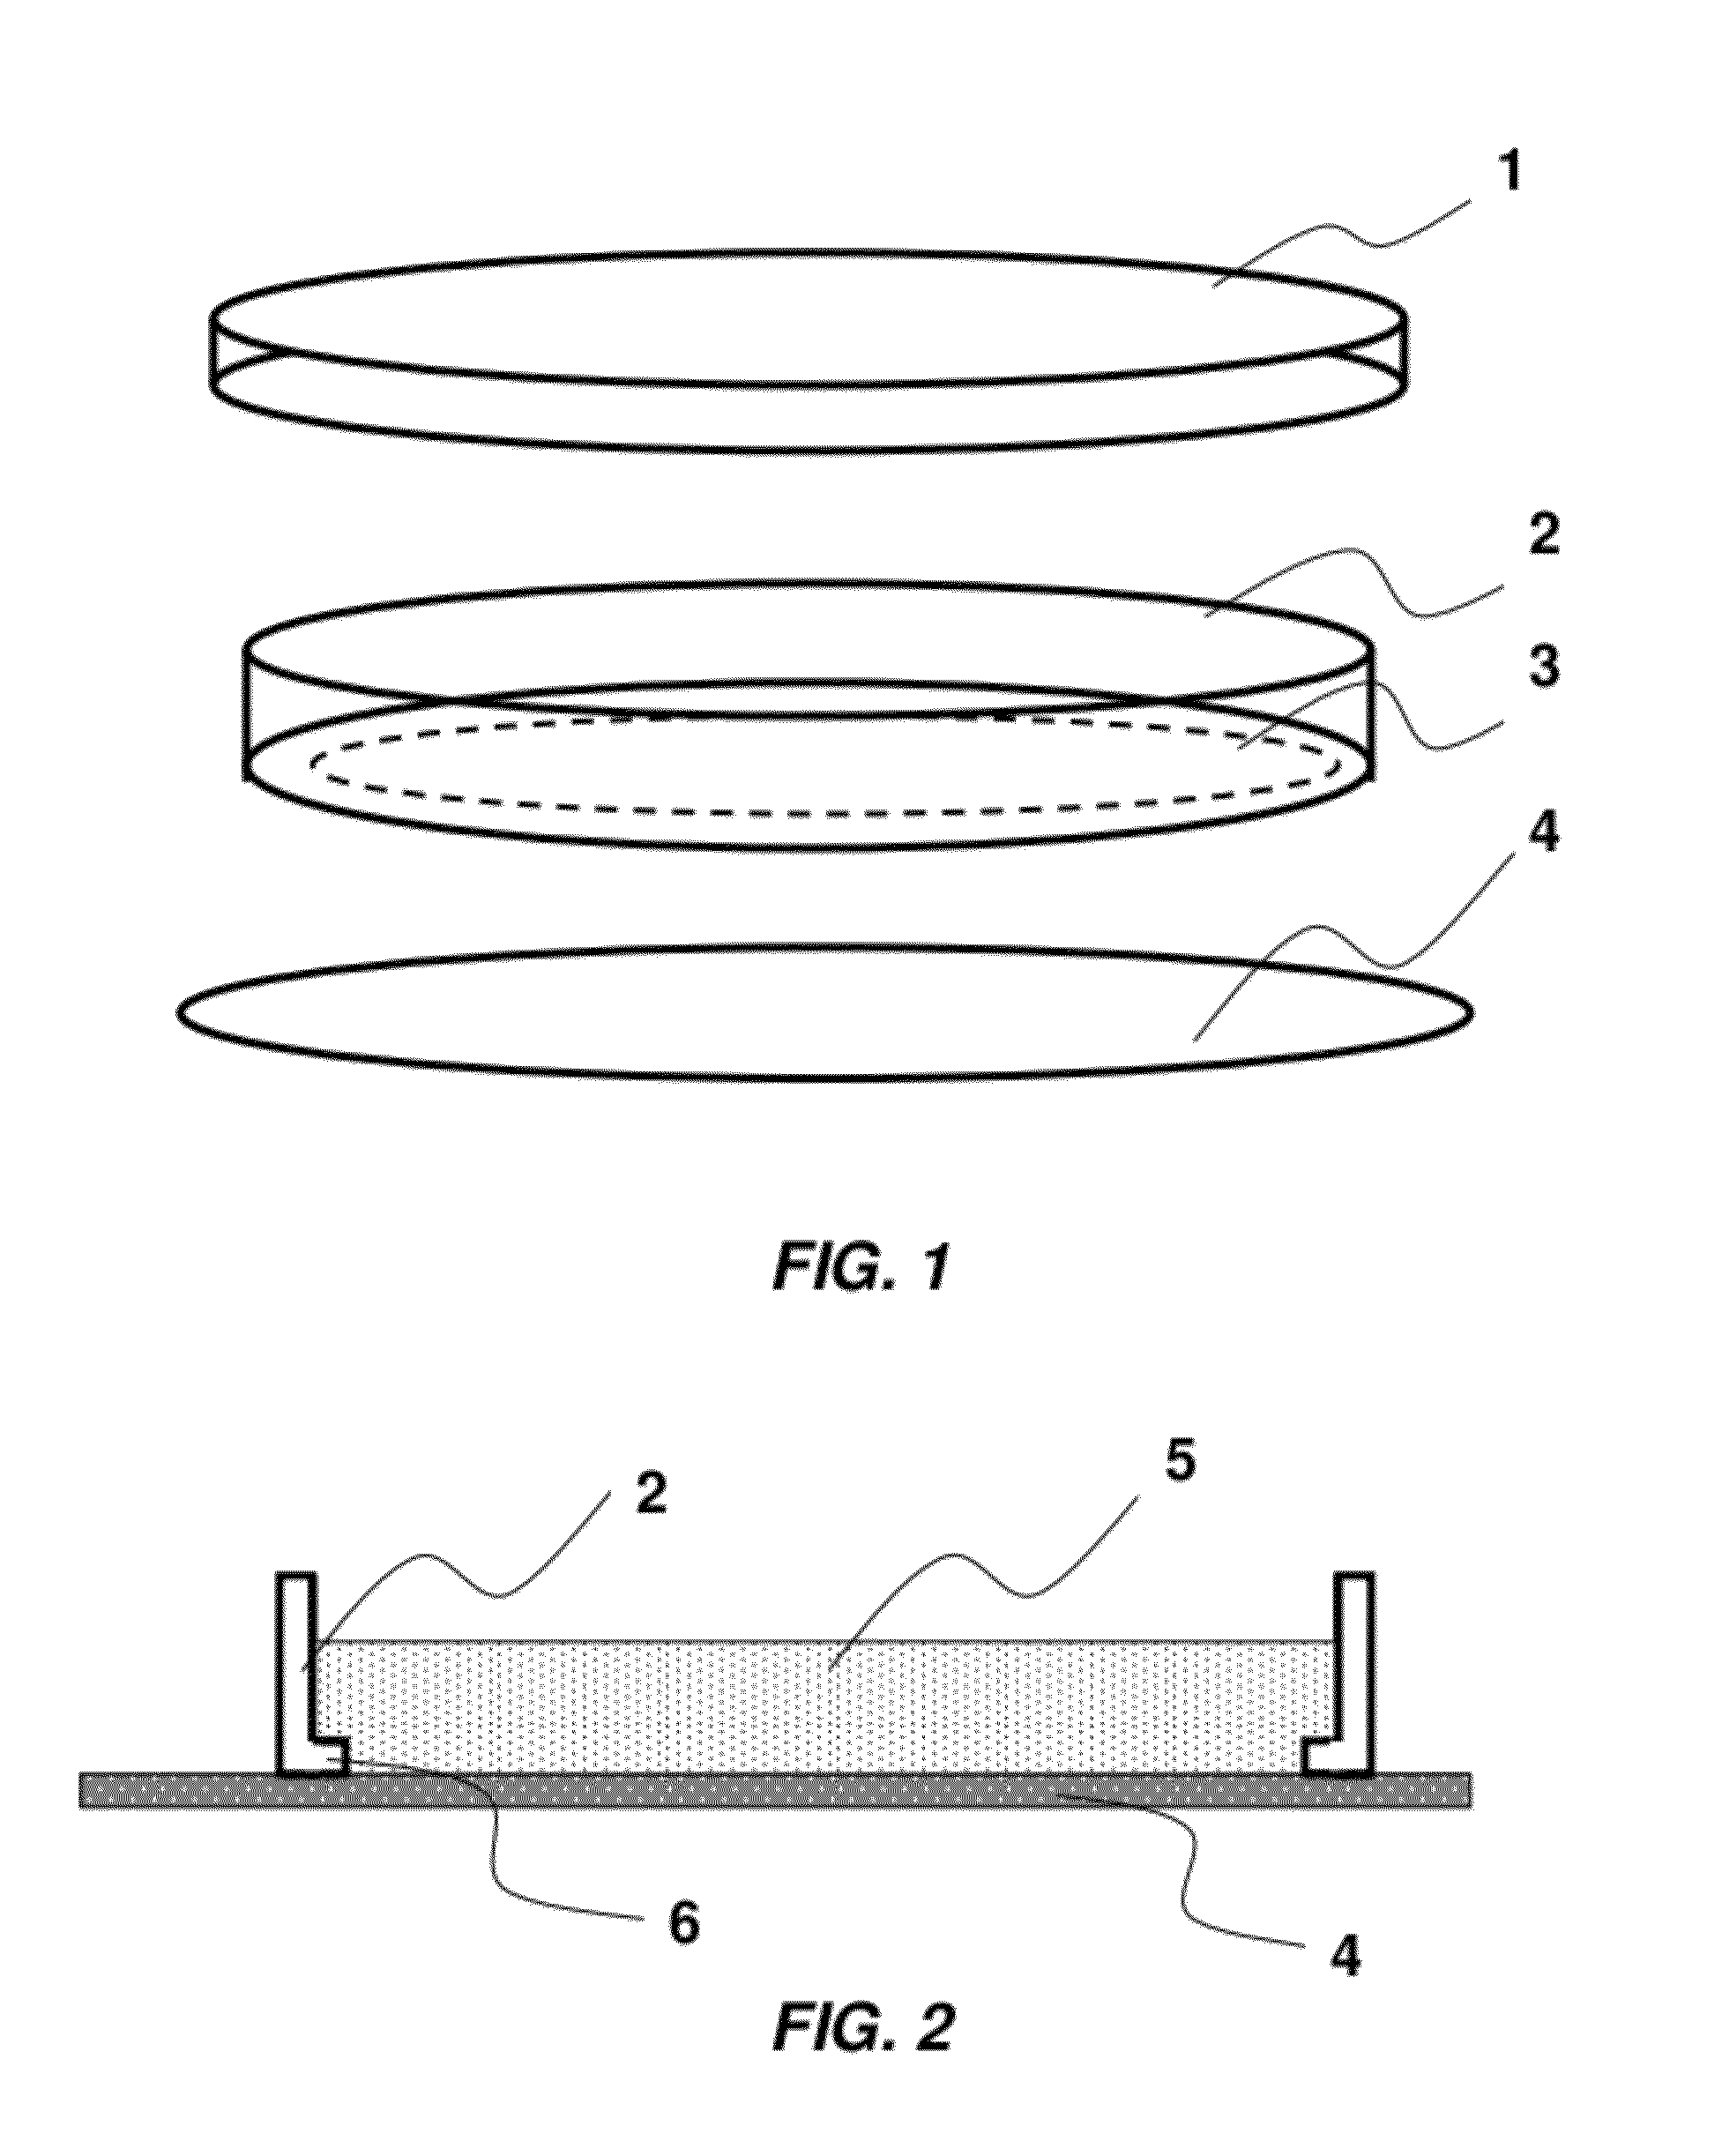 Method and apparatus for rapidly analyzing microorganisms using petri plates